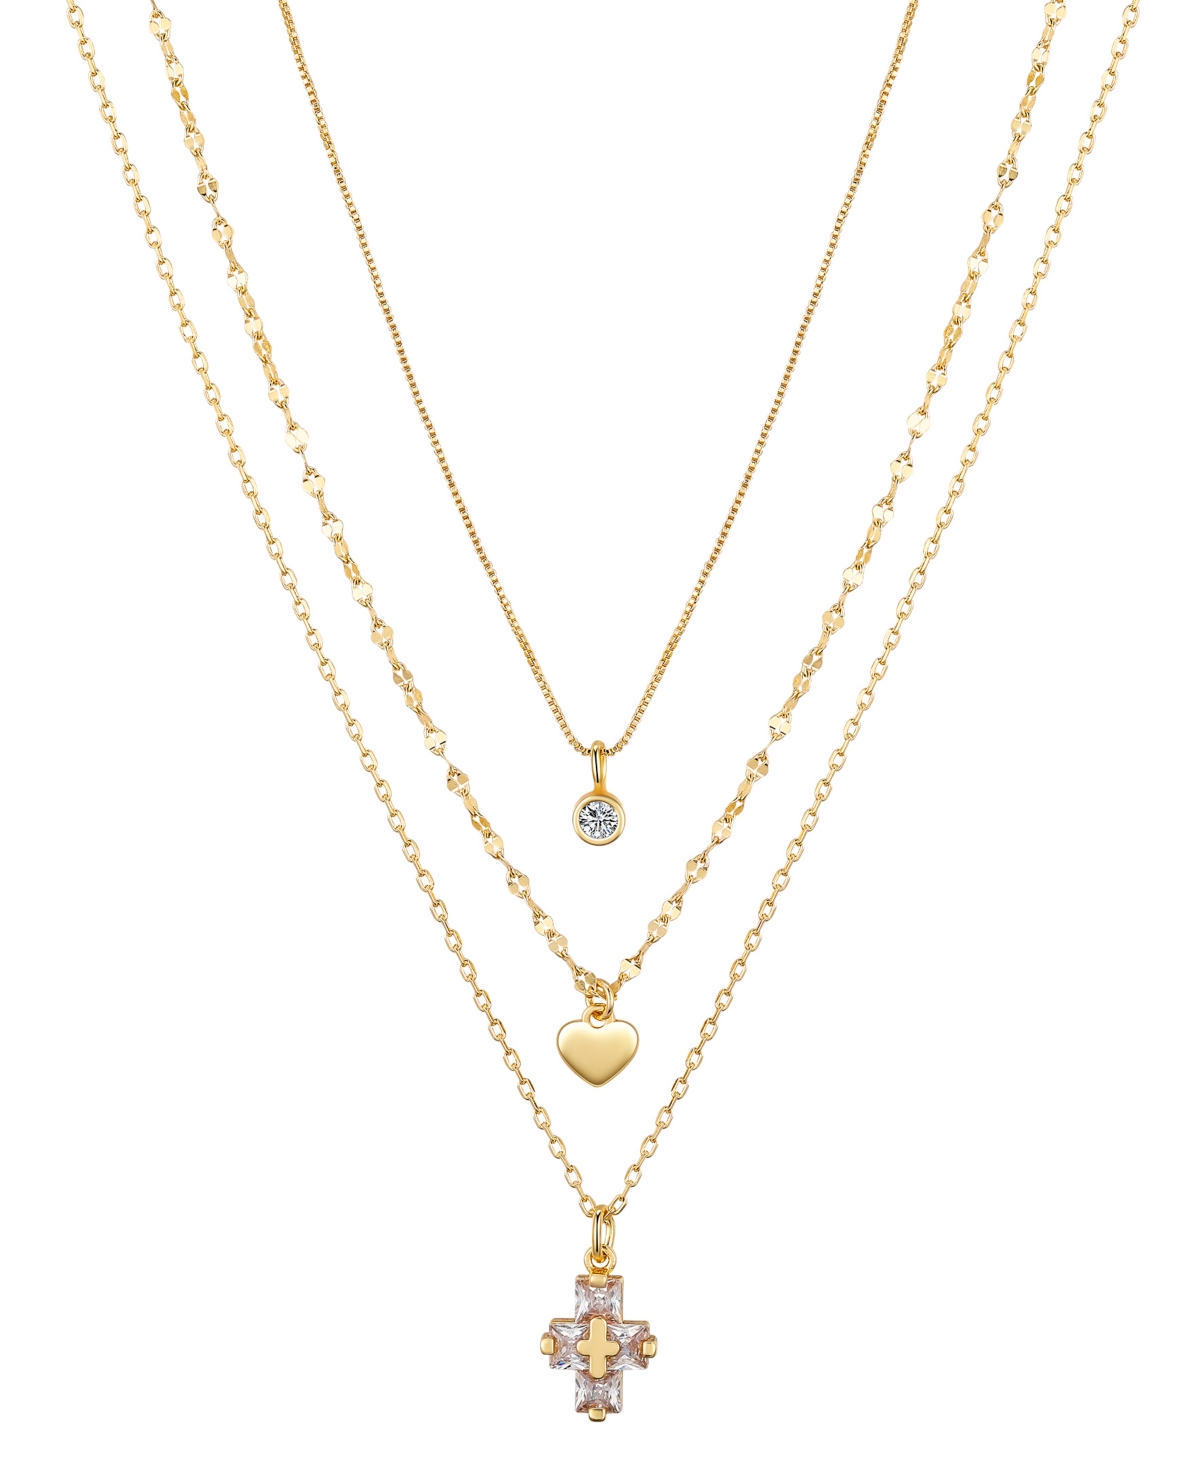 Unwritten Cubic Zirconia Cross And Heart Pendant Necklace Set In Gold